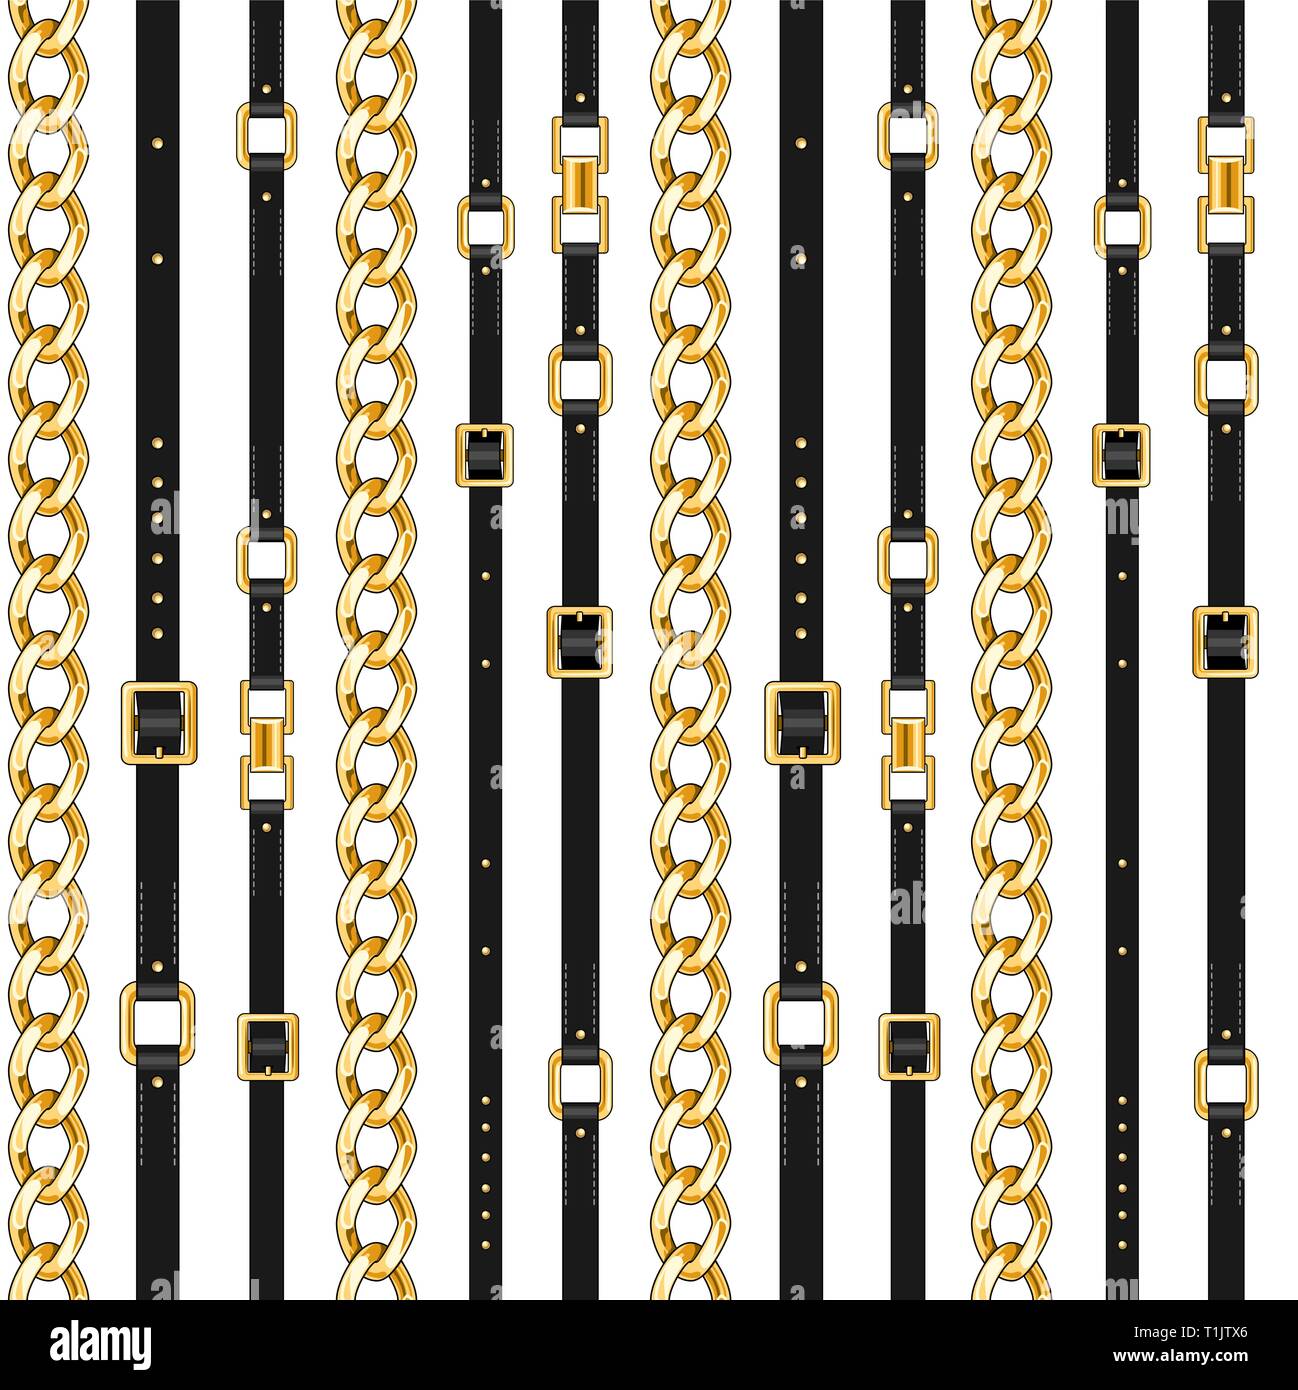 Abctract seamless pattern with belts and chain isolated for fabric. Trendy repeating print. Stock Vector